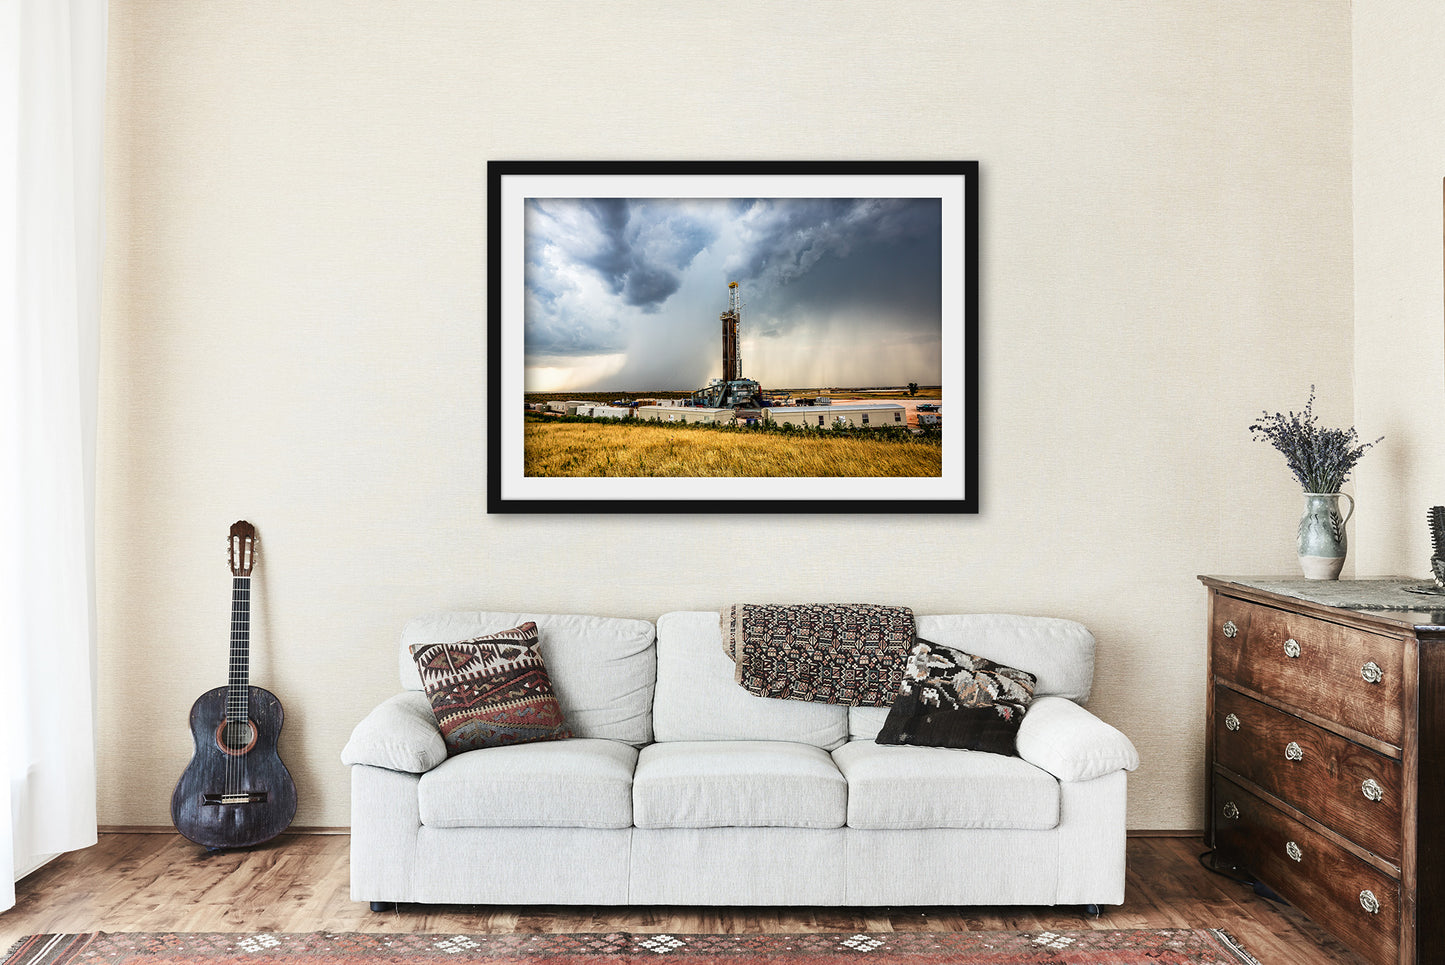 Framed Oilfield Print (Ready to Hang) Picture of Drilling Rig and Storm on Summer Day in Oklahoma Thunderstorm Wall Art Oil and Gas Decor